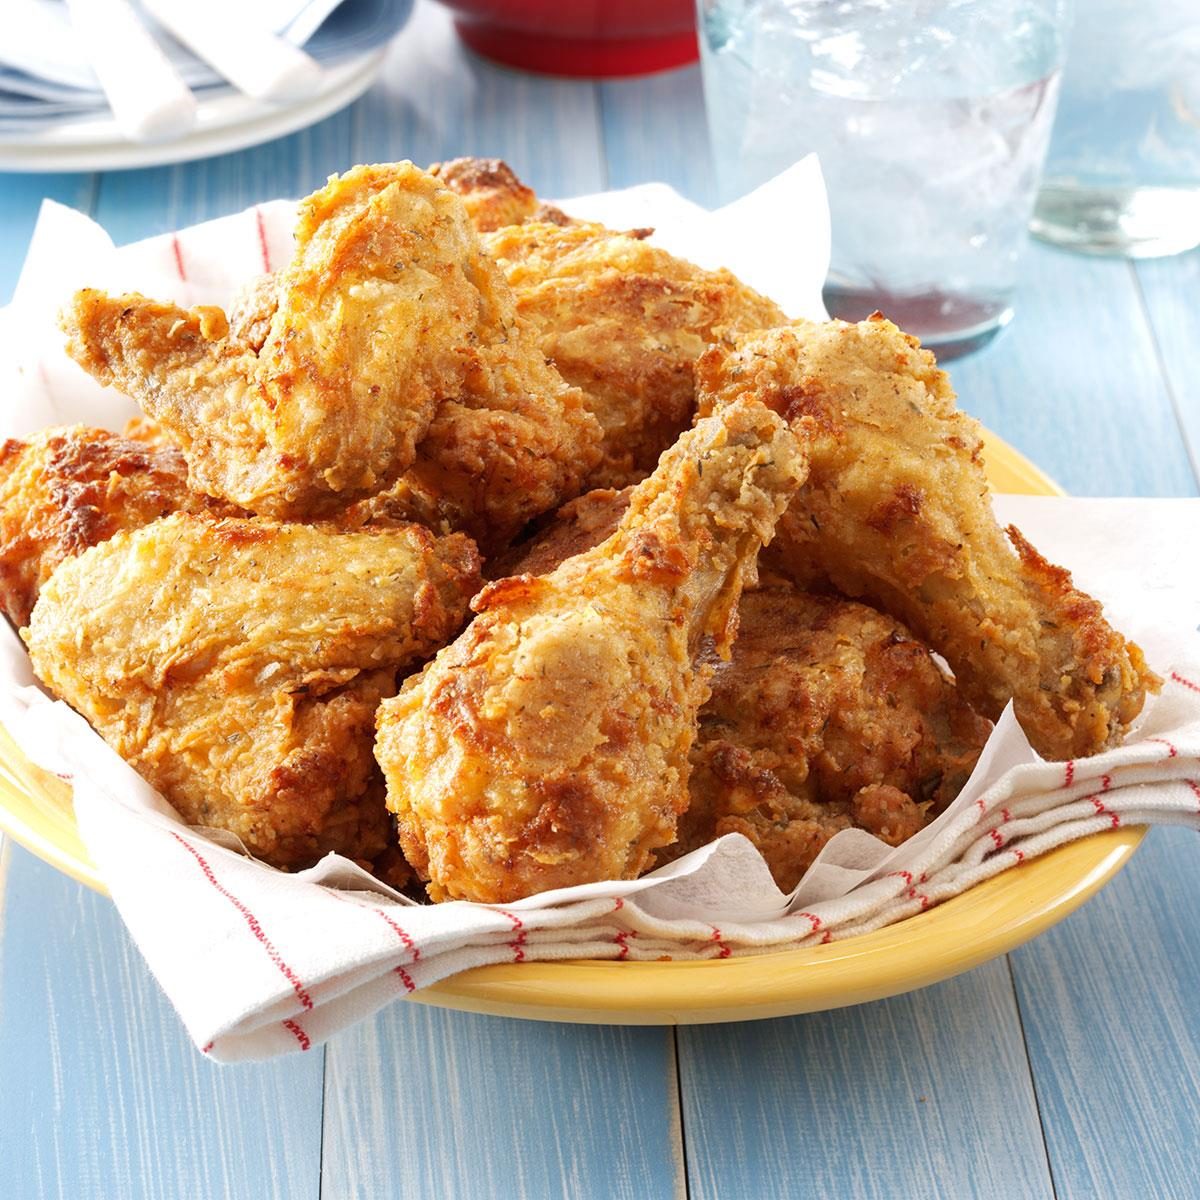 https://www.tasteofhome.com/wp-content/uploads/2018/01/Southern-Fried-Chicken-with-Gravy_exps33285_THRAA2874593C01_23_1b_RMS-5.jpg?fit=700%2C1024